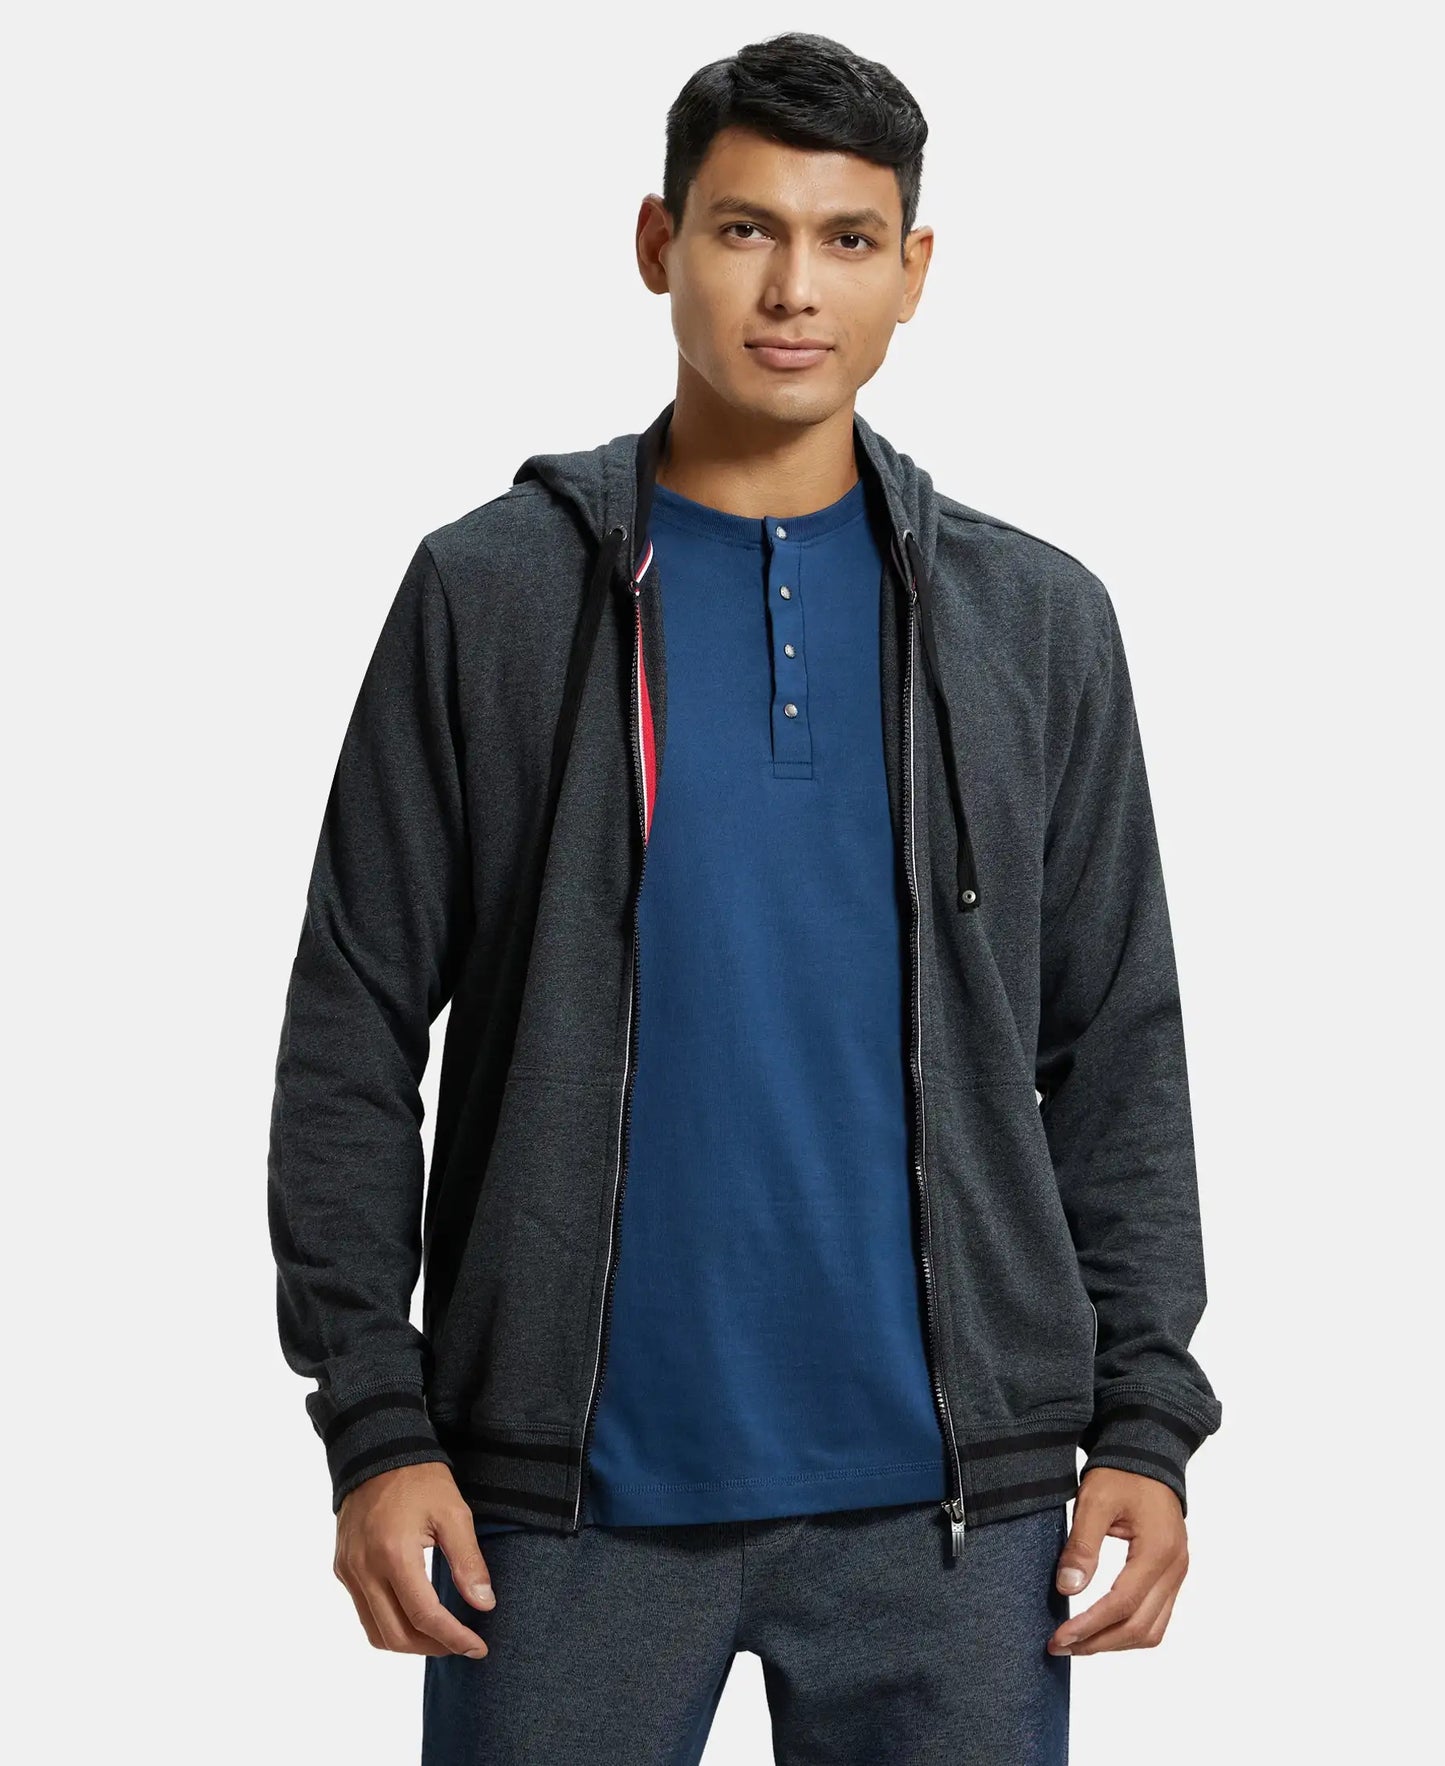 Super Combed Cotton French Terry Hoodie Jacket with Ribbed Cuffs - True Black Melange-1